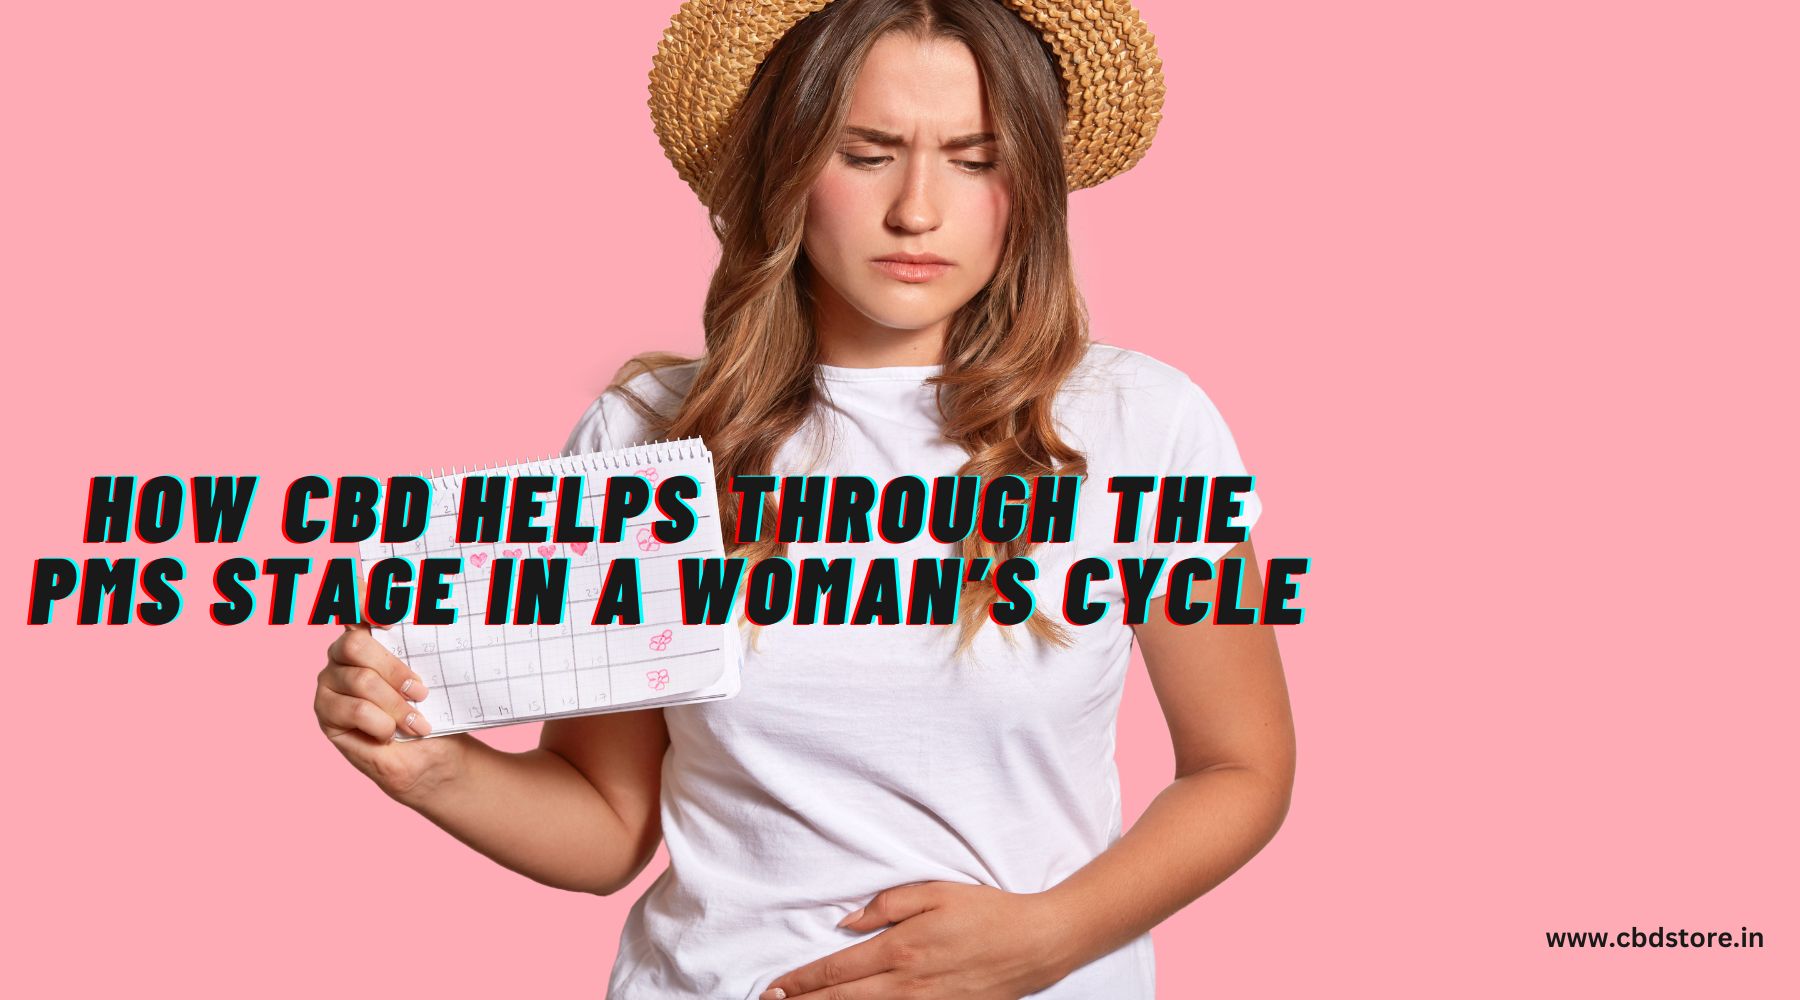 How CBD helps through the PMS stage in a woman’s cycle